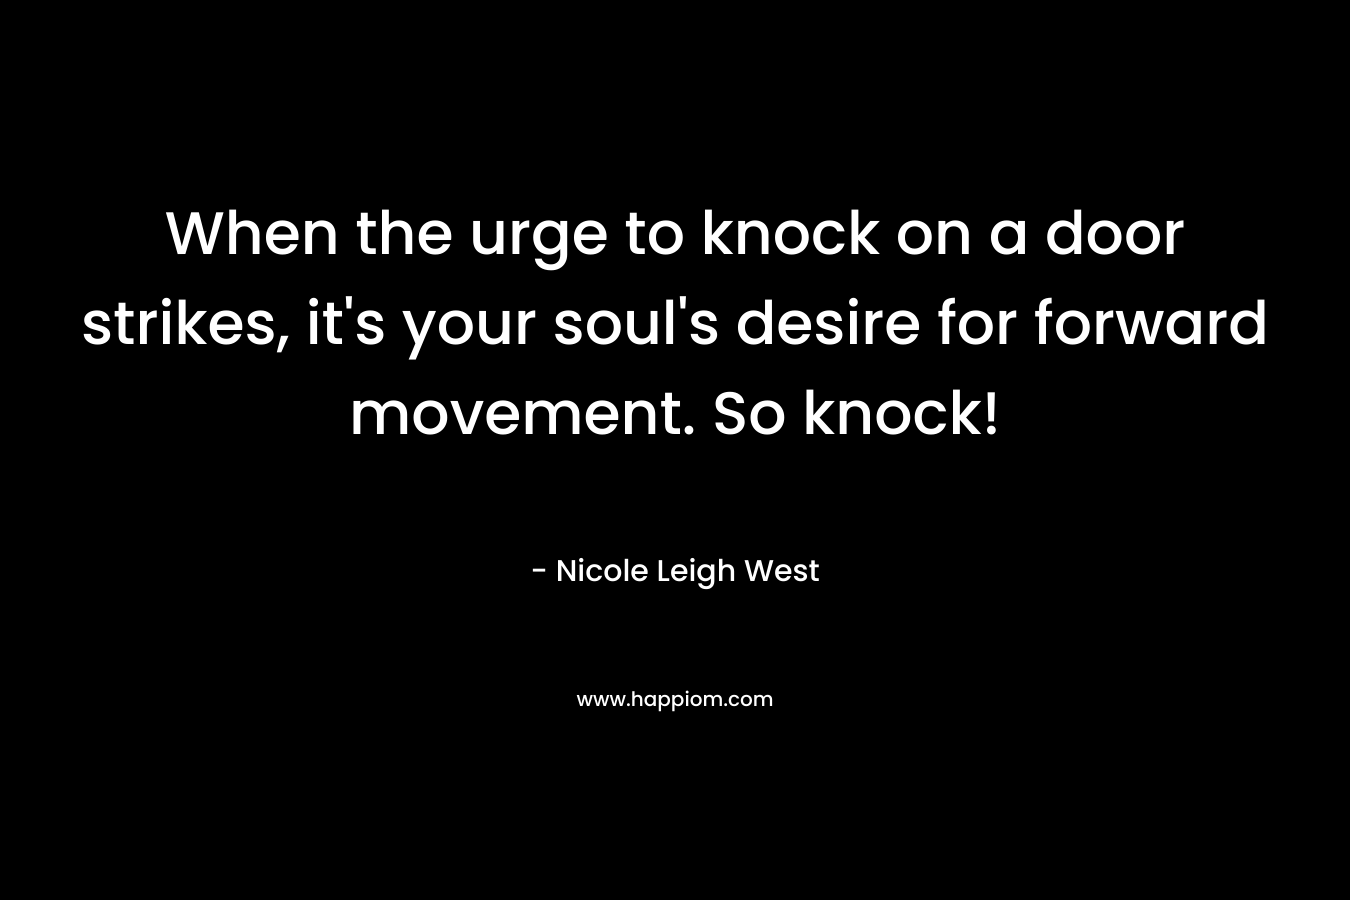 When the urge to knock on a door strikes, it’s your soul’s desire for forward movement. So knock! – Nicole Leigh West